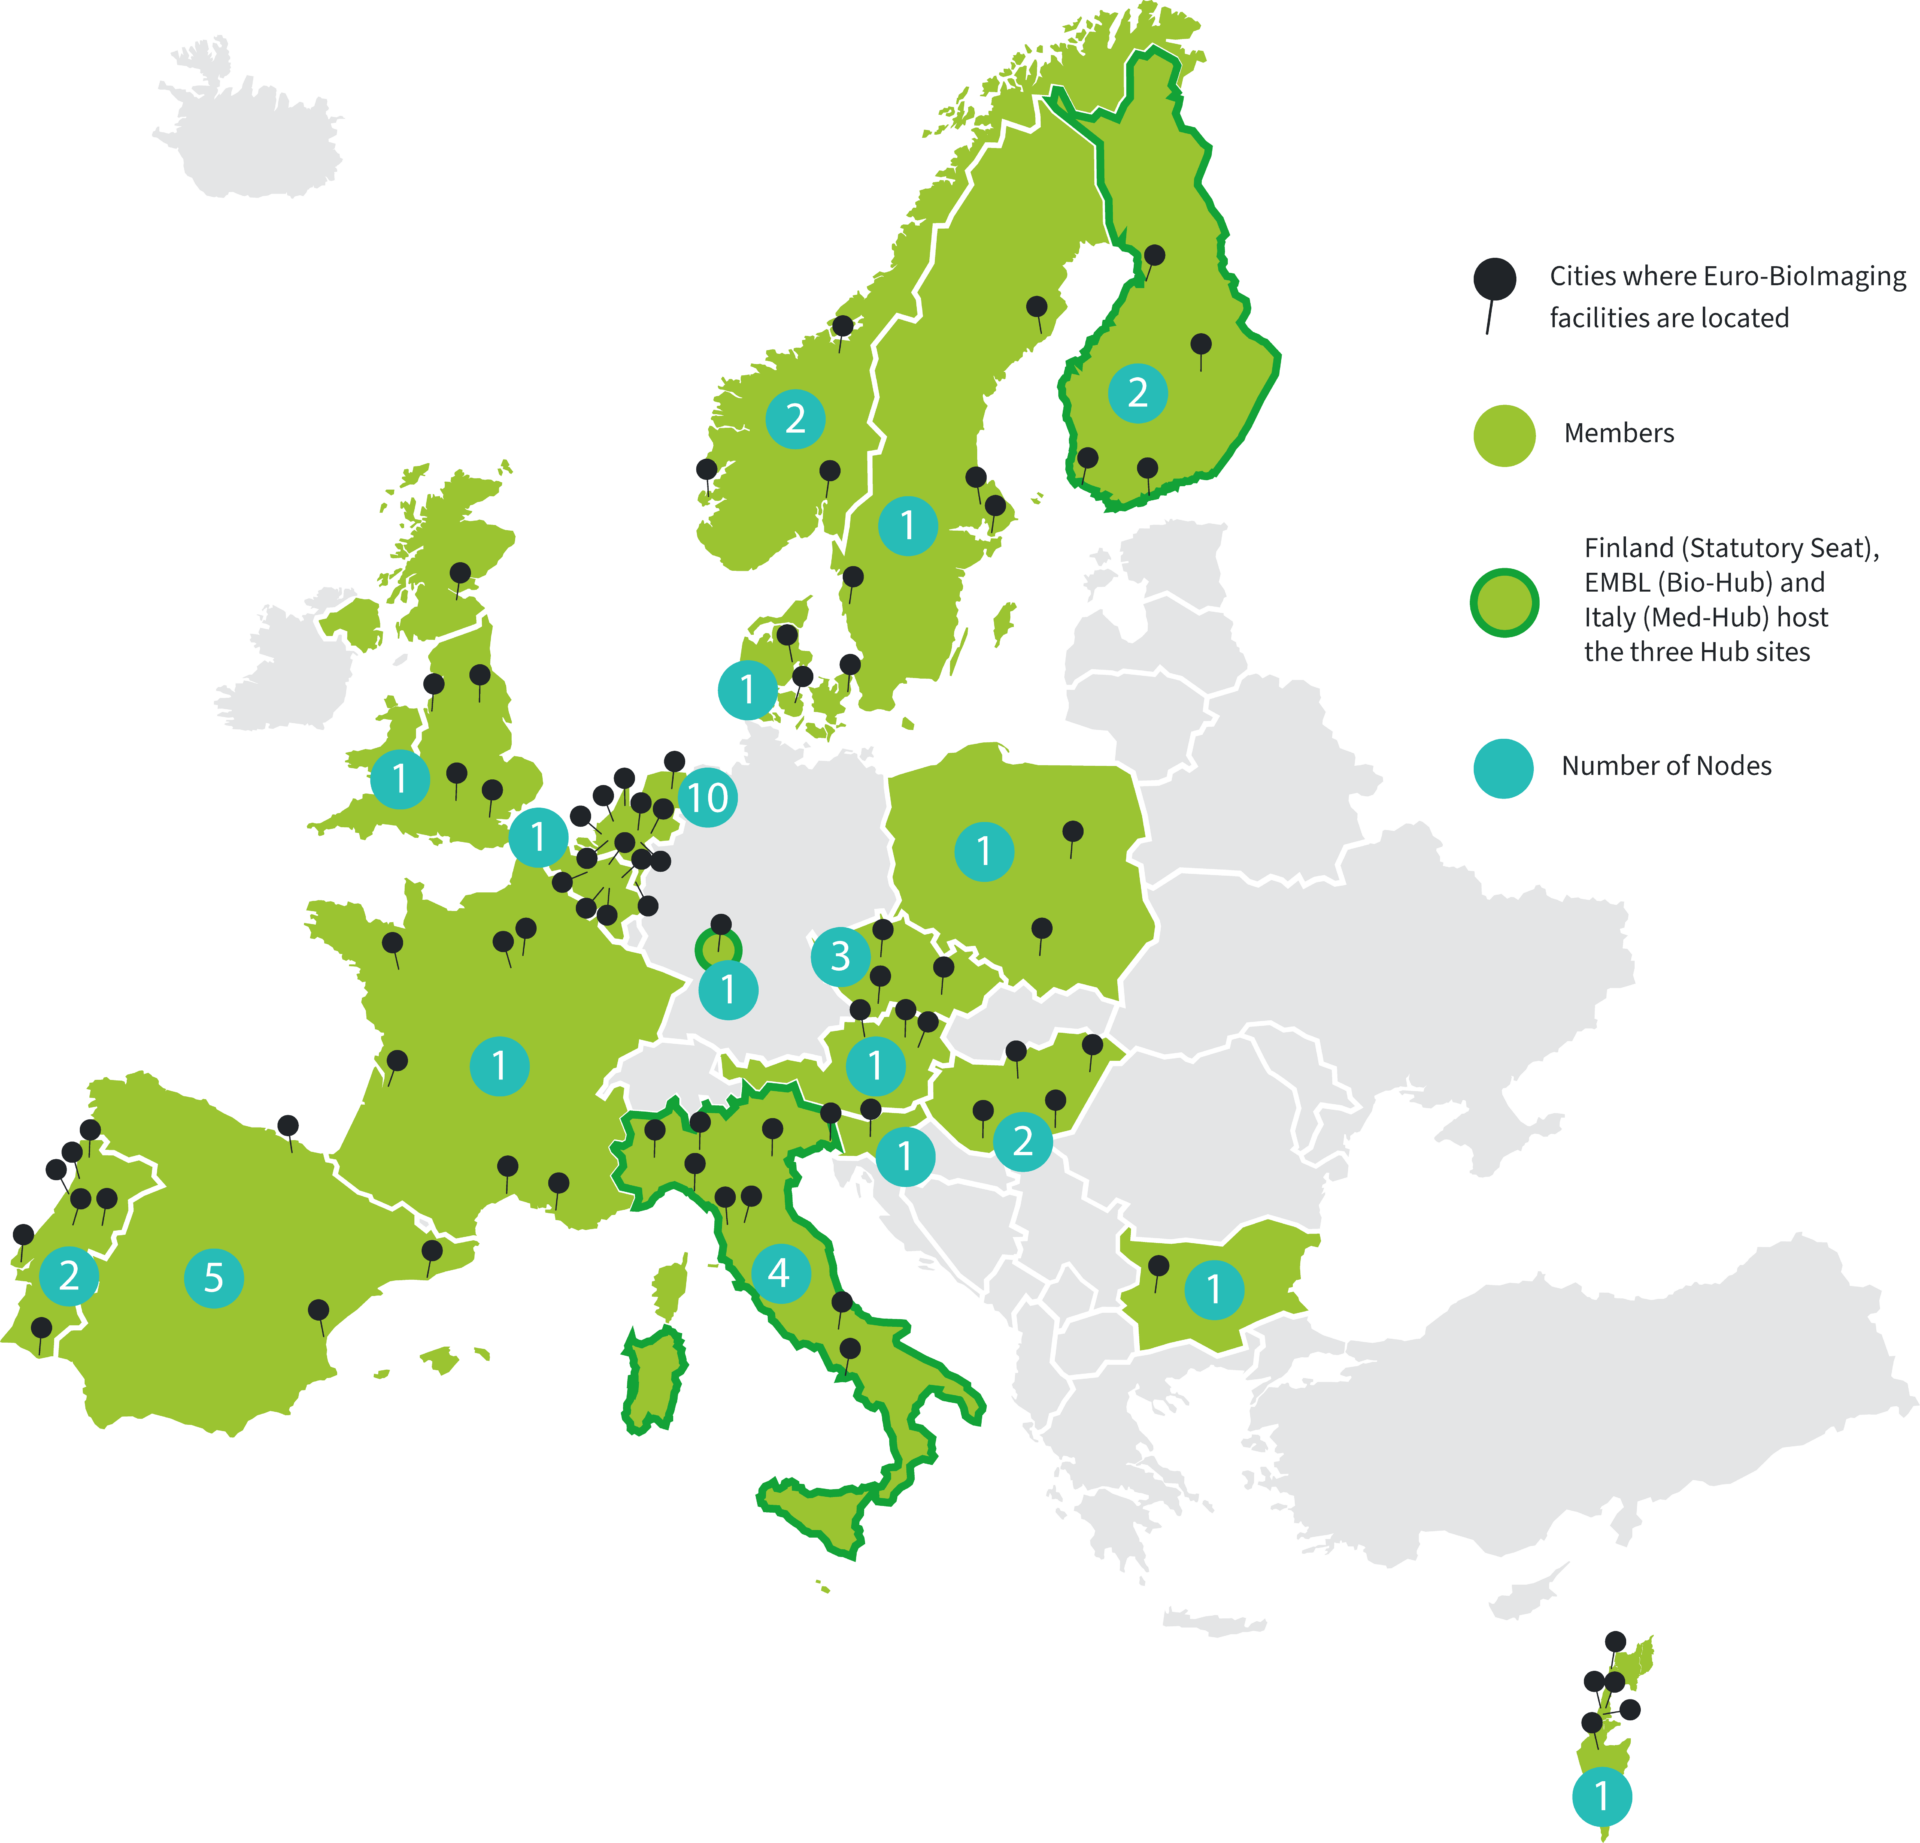 Euro-BioImaging Map of member countries, Nodes and facility sites. 